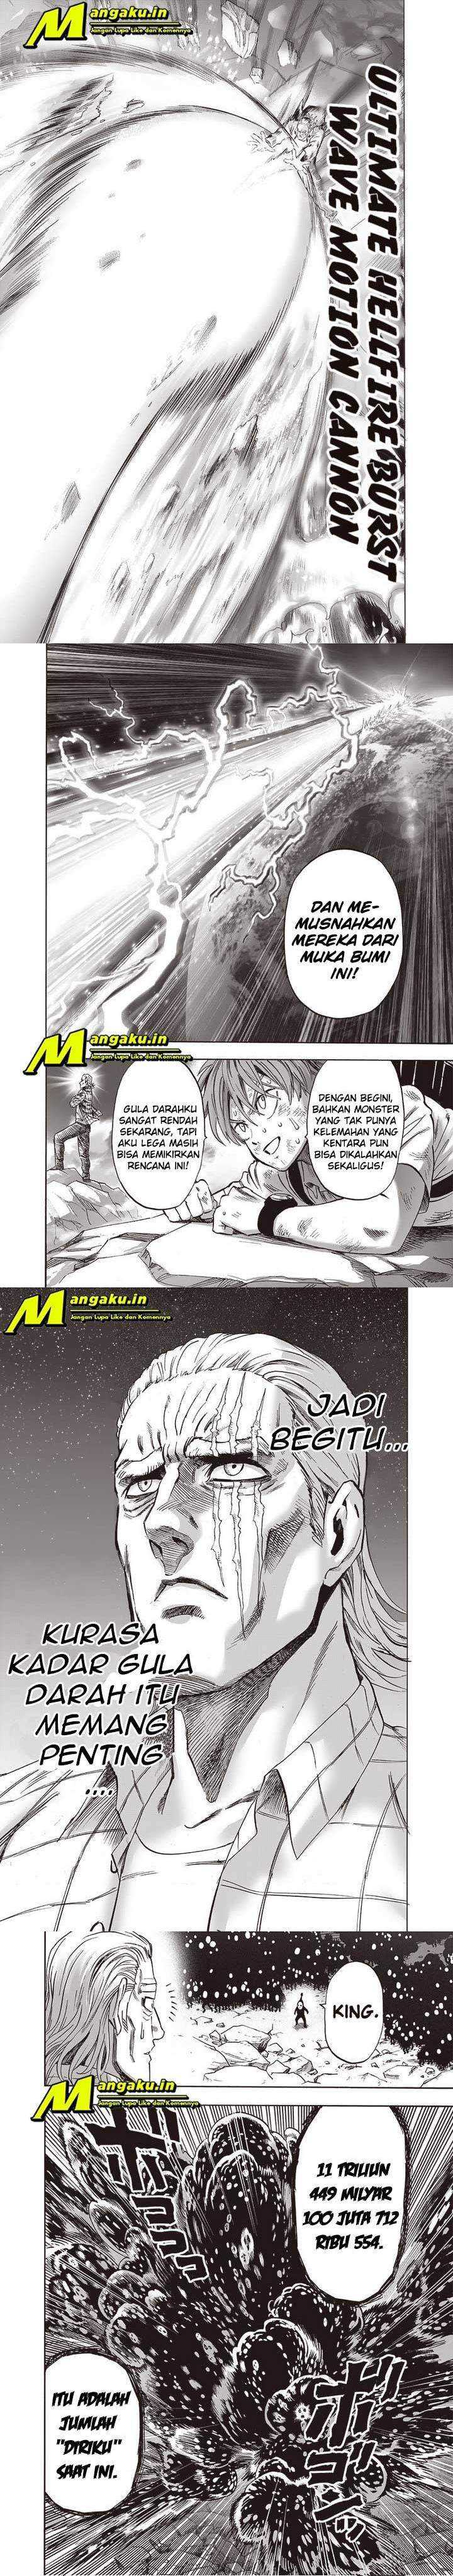 One Punch Man Chapter 206 8